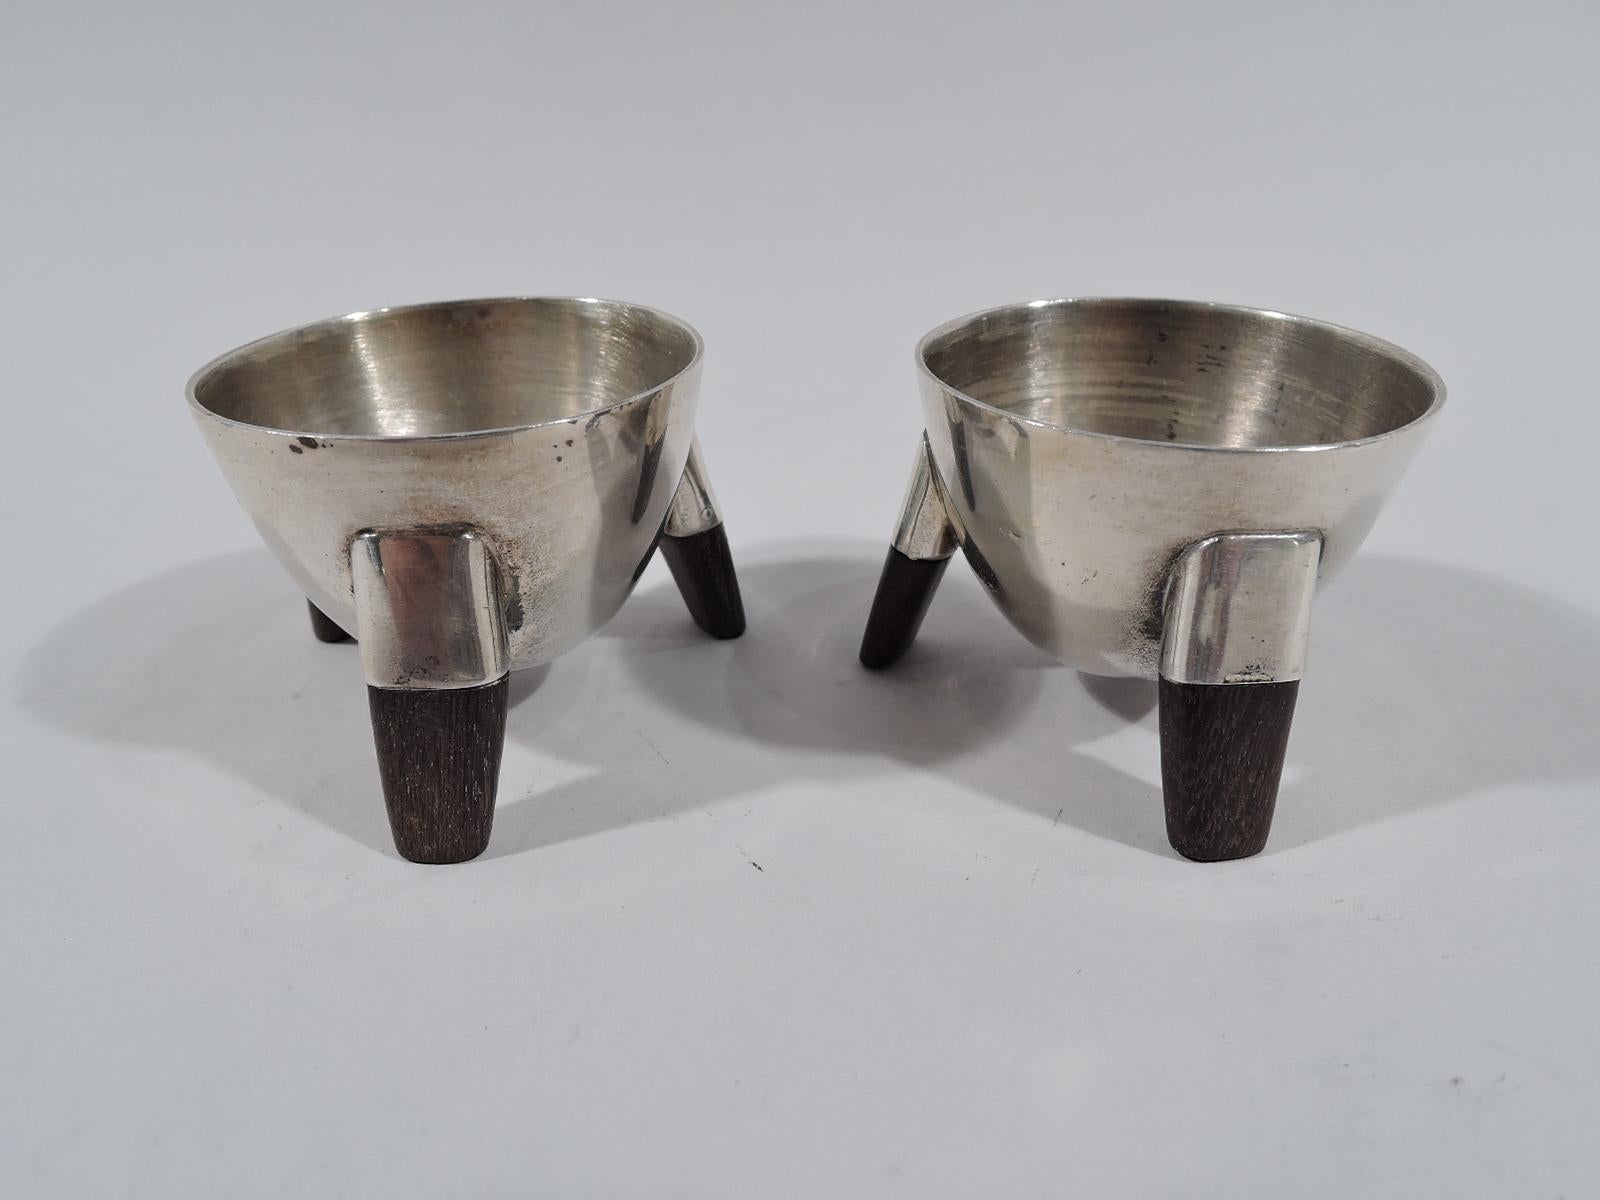 Pair of Mid-Century Modern sterling silver open salts. Made by Spratling in Taxco, Mexico. Conical bowl with 3 side-mounted stained-wood peg supports. Fully marked with maker’s stamp (circa 1964-1967) and eagle stamp with no. 30. Total gross weight: